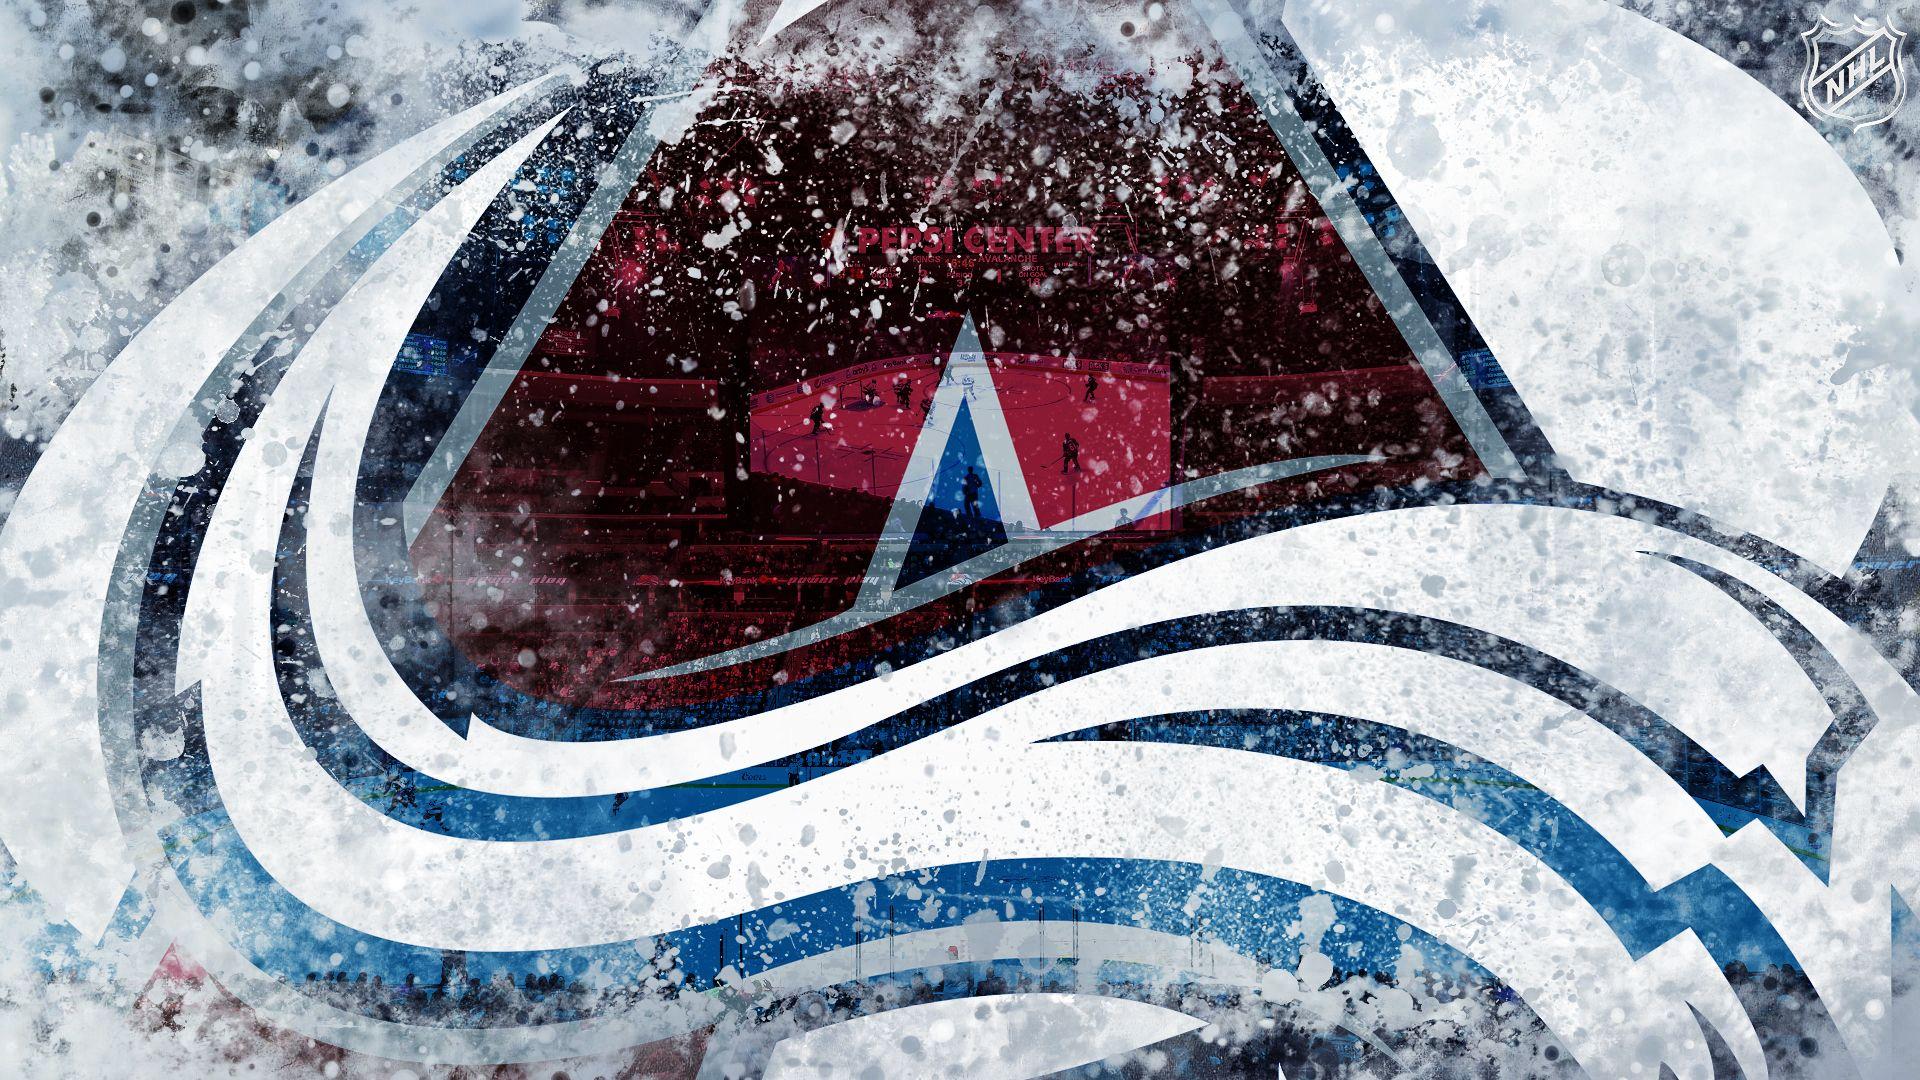 Colorado Avalanche Wallpapers Top Free Colorado Avalanche Backgrounds